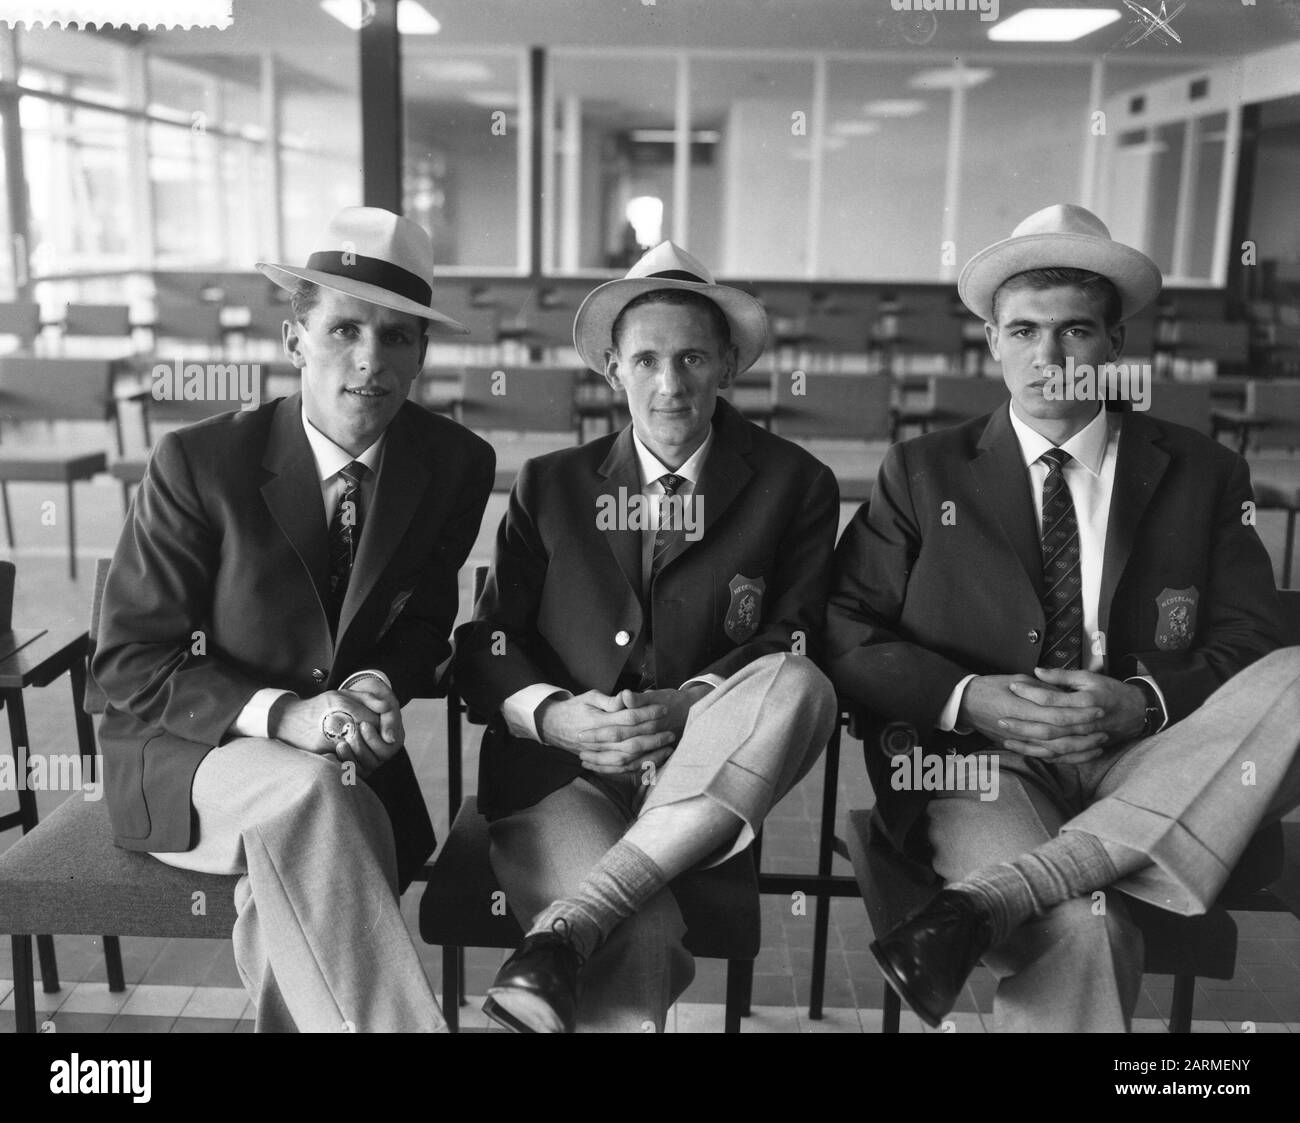 Departure boxers and cyclists to Rome, from l.n.r. Wim Gerlach, Jan de Rooy  and Bas van Duivenbode (boxers) Date: 22 August 1960 Location: Schiphol  Keywords: athletes, boxing, airports Personal name: Pigeon bode,